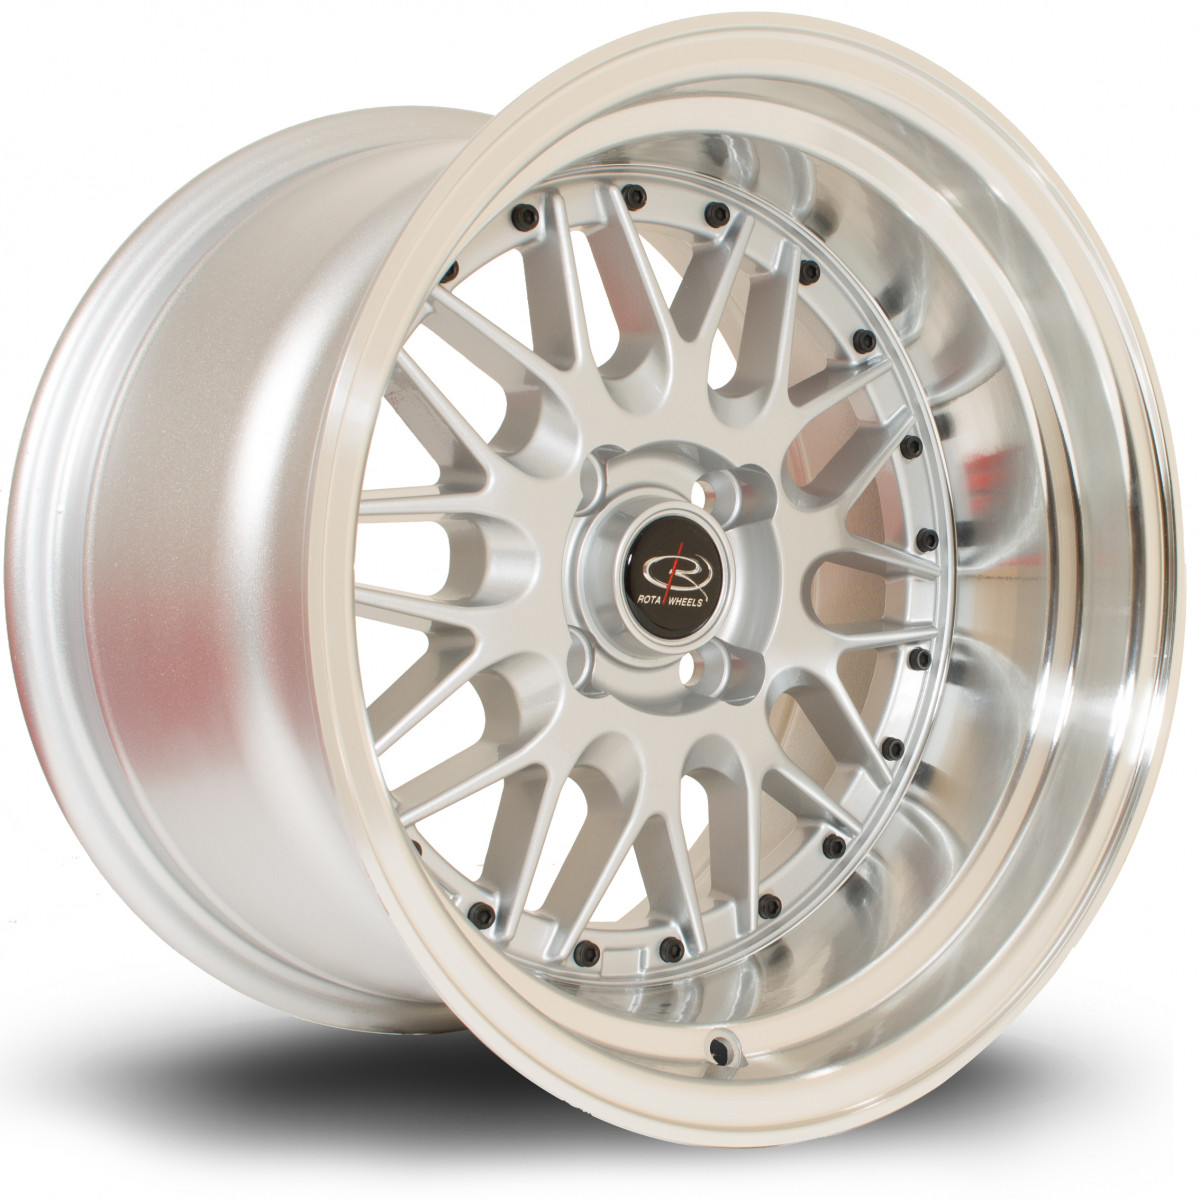 Kensei 15x9 4x114 ET-10 Silver with Polished Lip